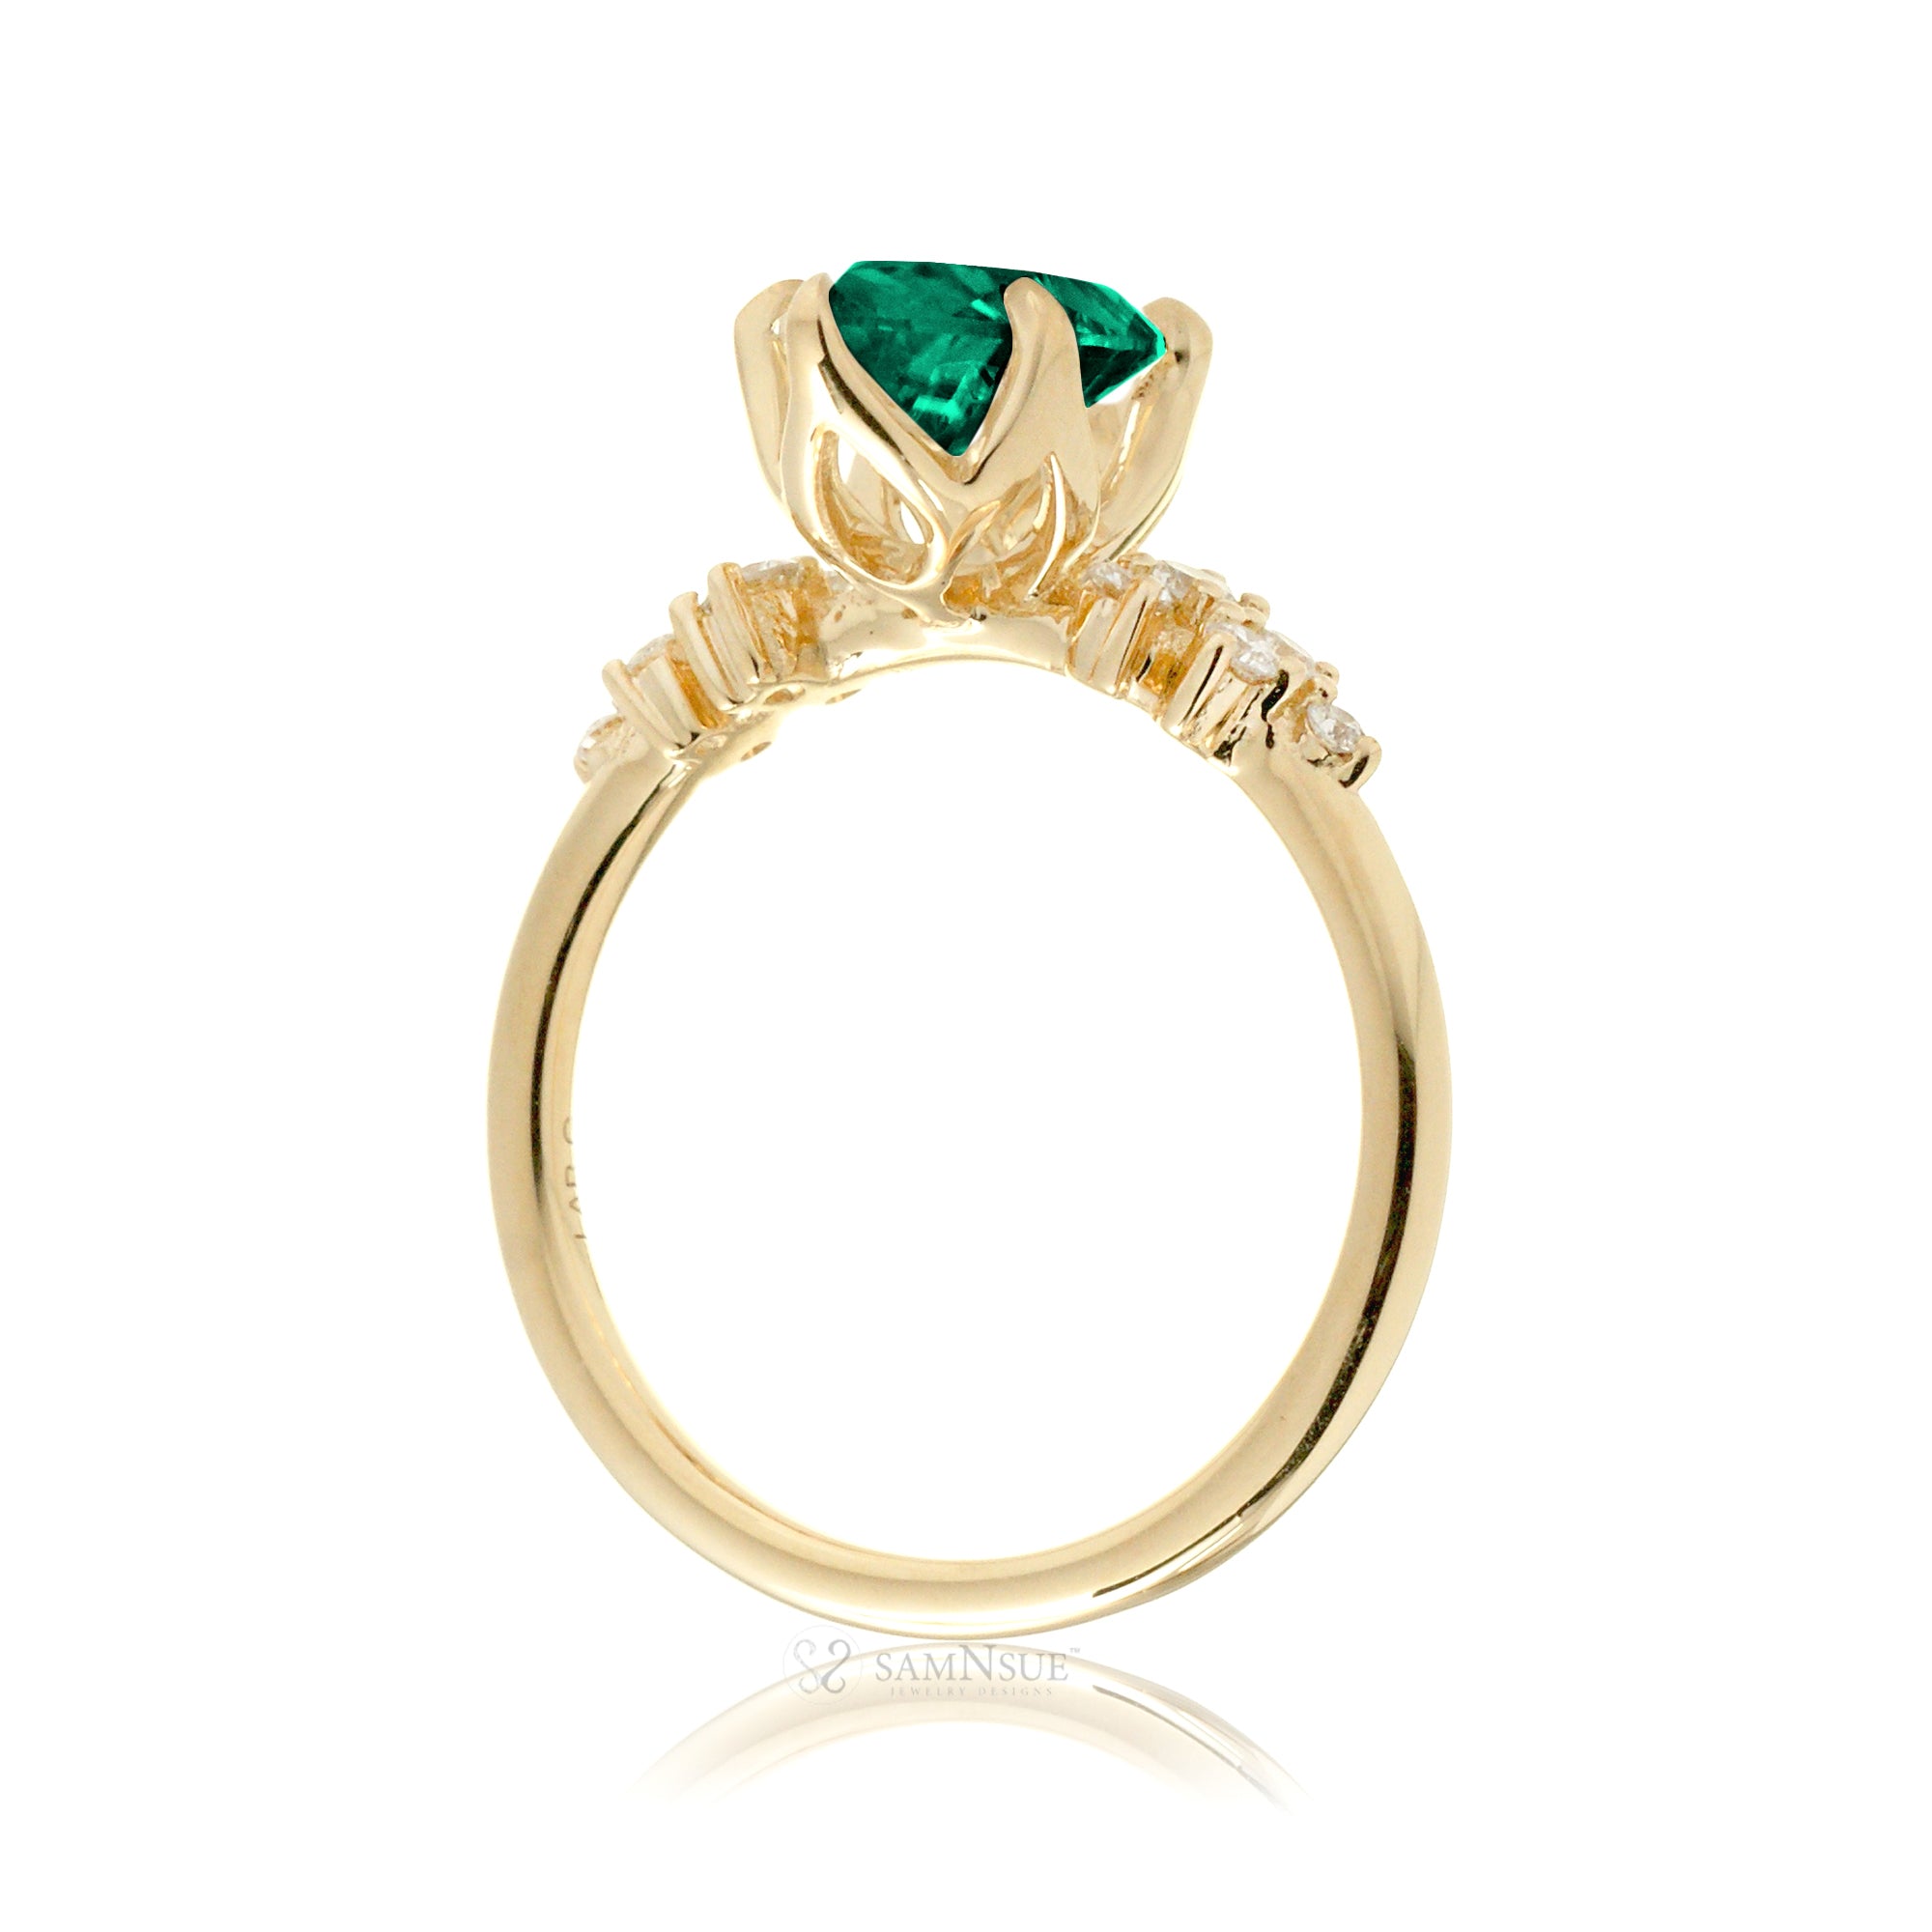 Oval emerald ring with diamond accent on yellow gold